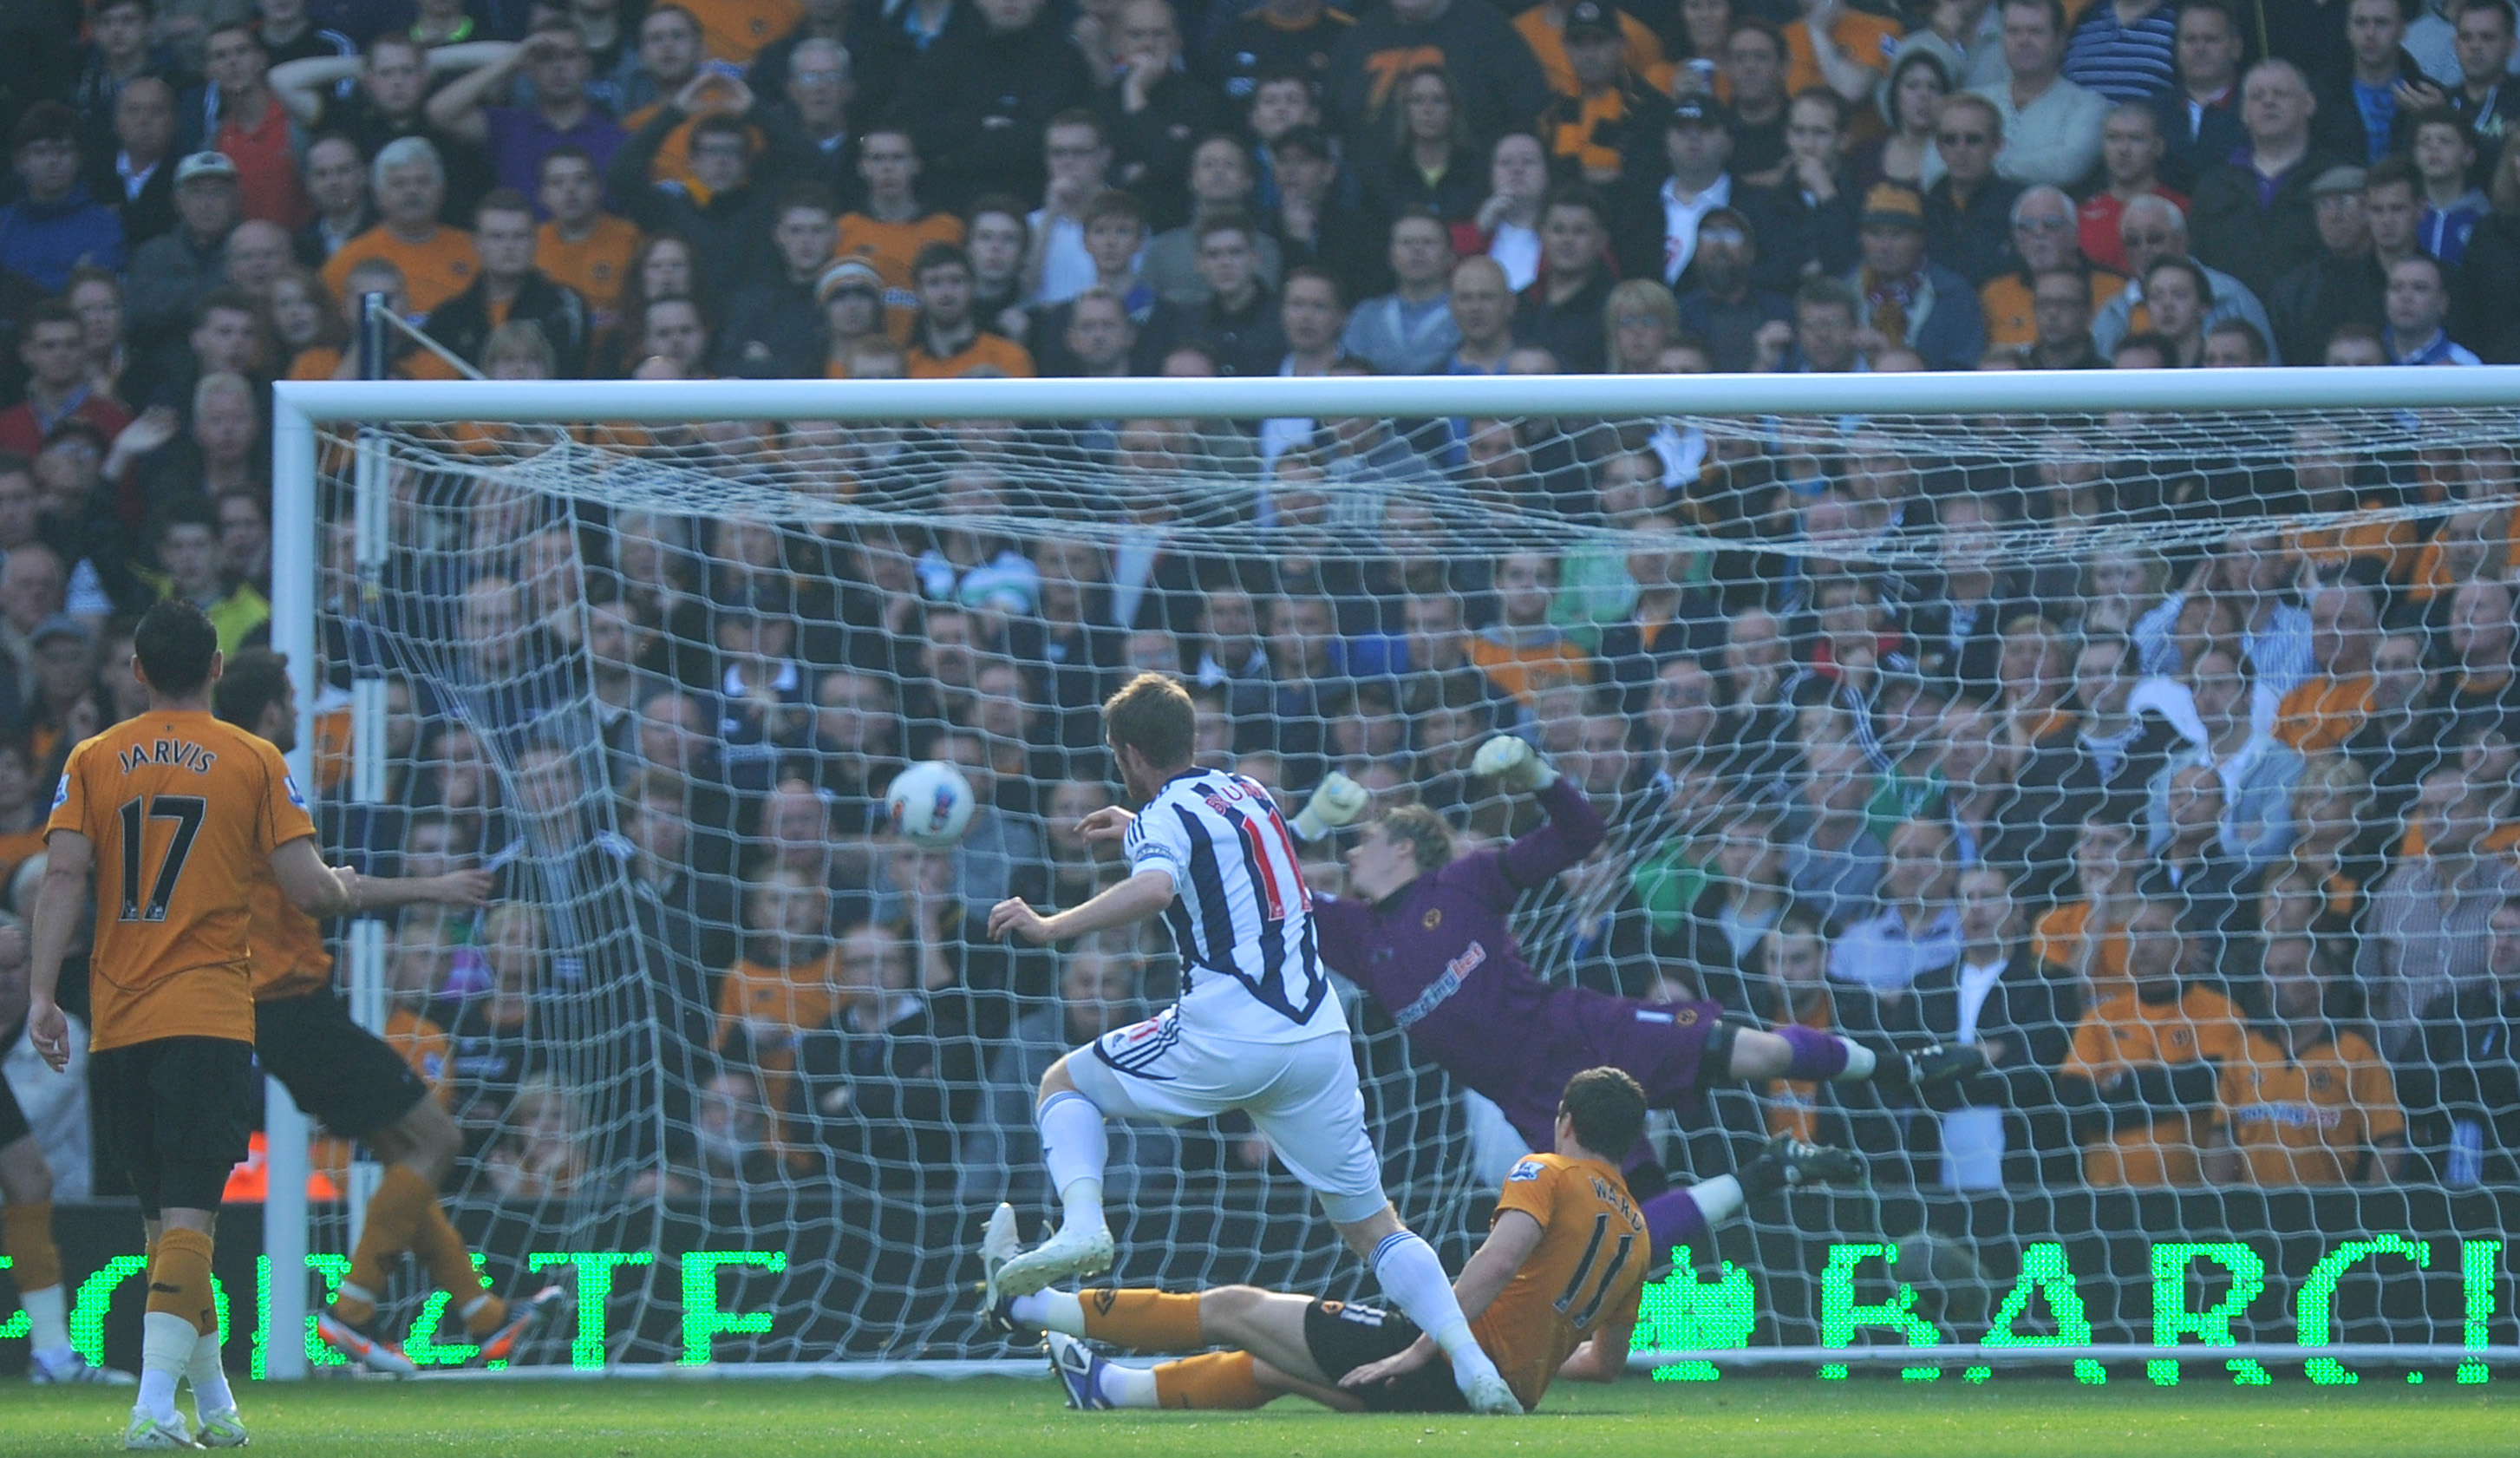 The ball hitting the back of the net as Chris Brunt scores against Wolves in 2011